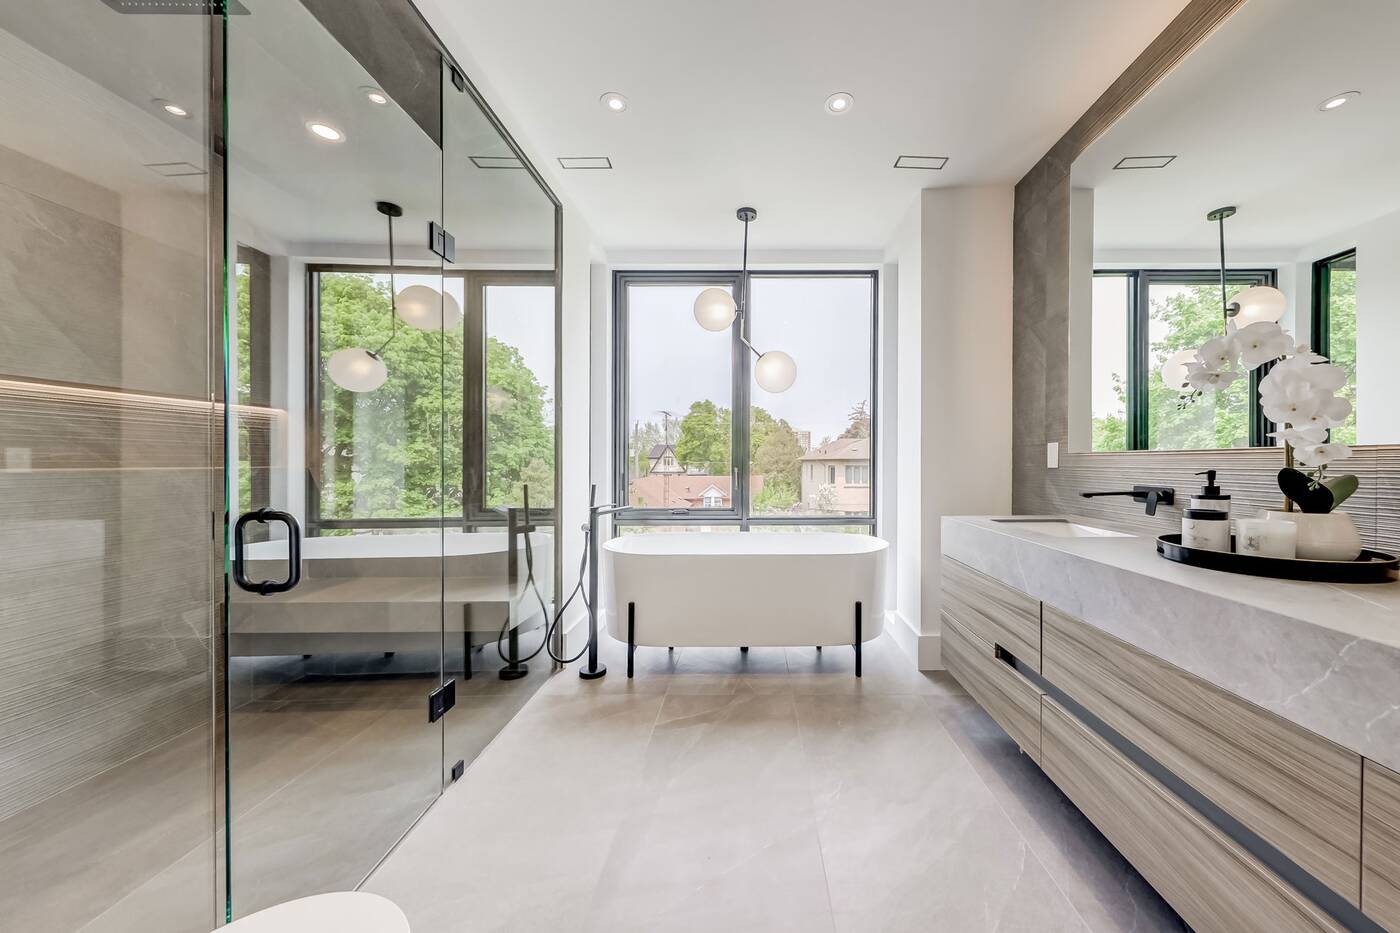 This $5 million Toronto home is about as modern and high-tech as it gets